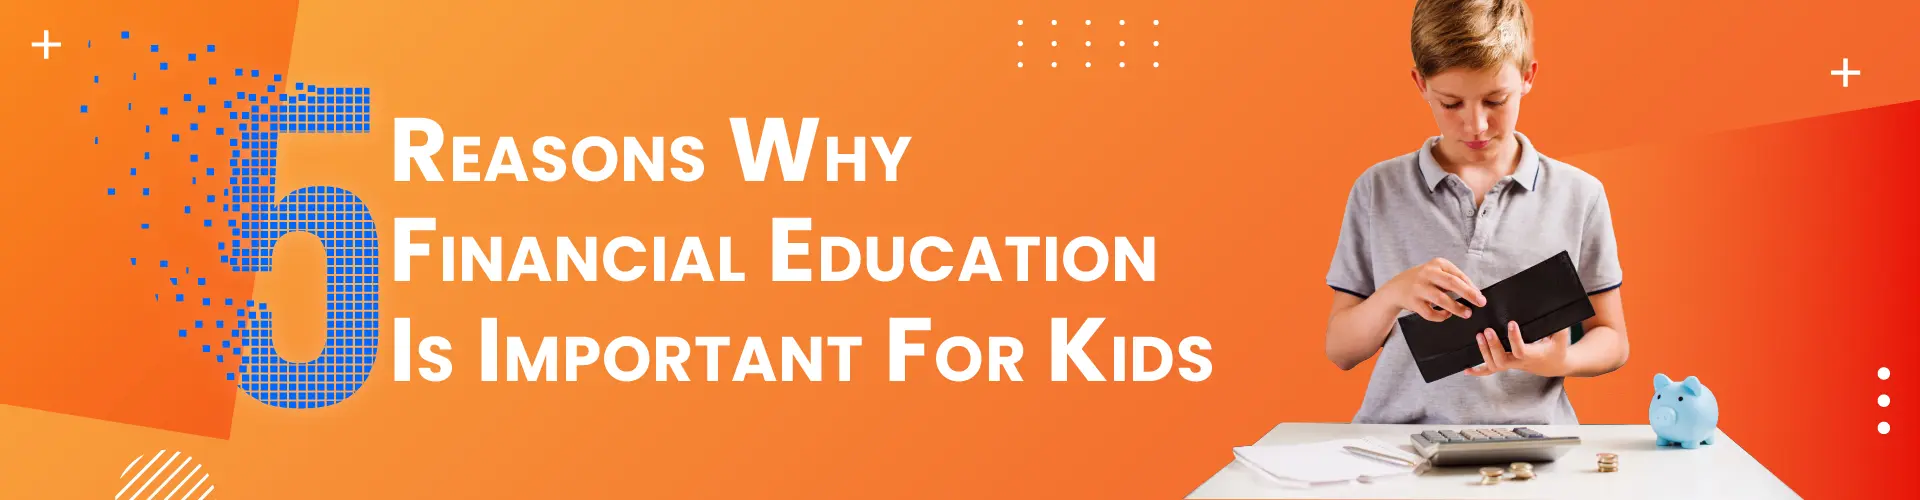 5 reasons why financial education is important